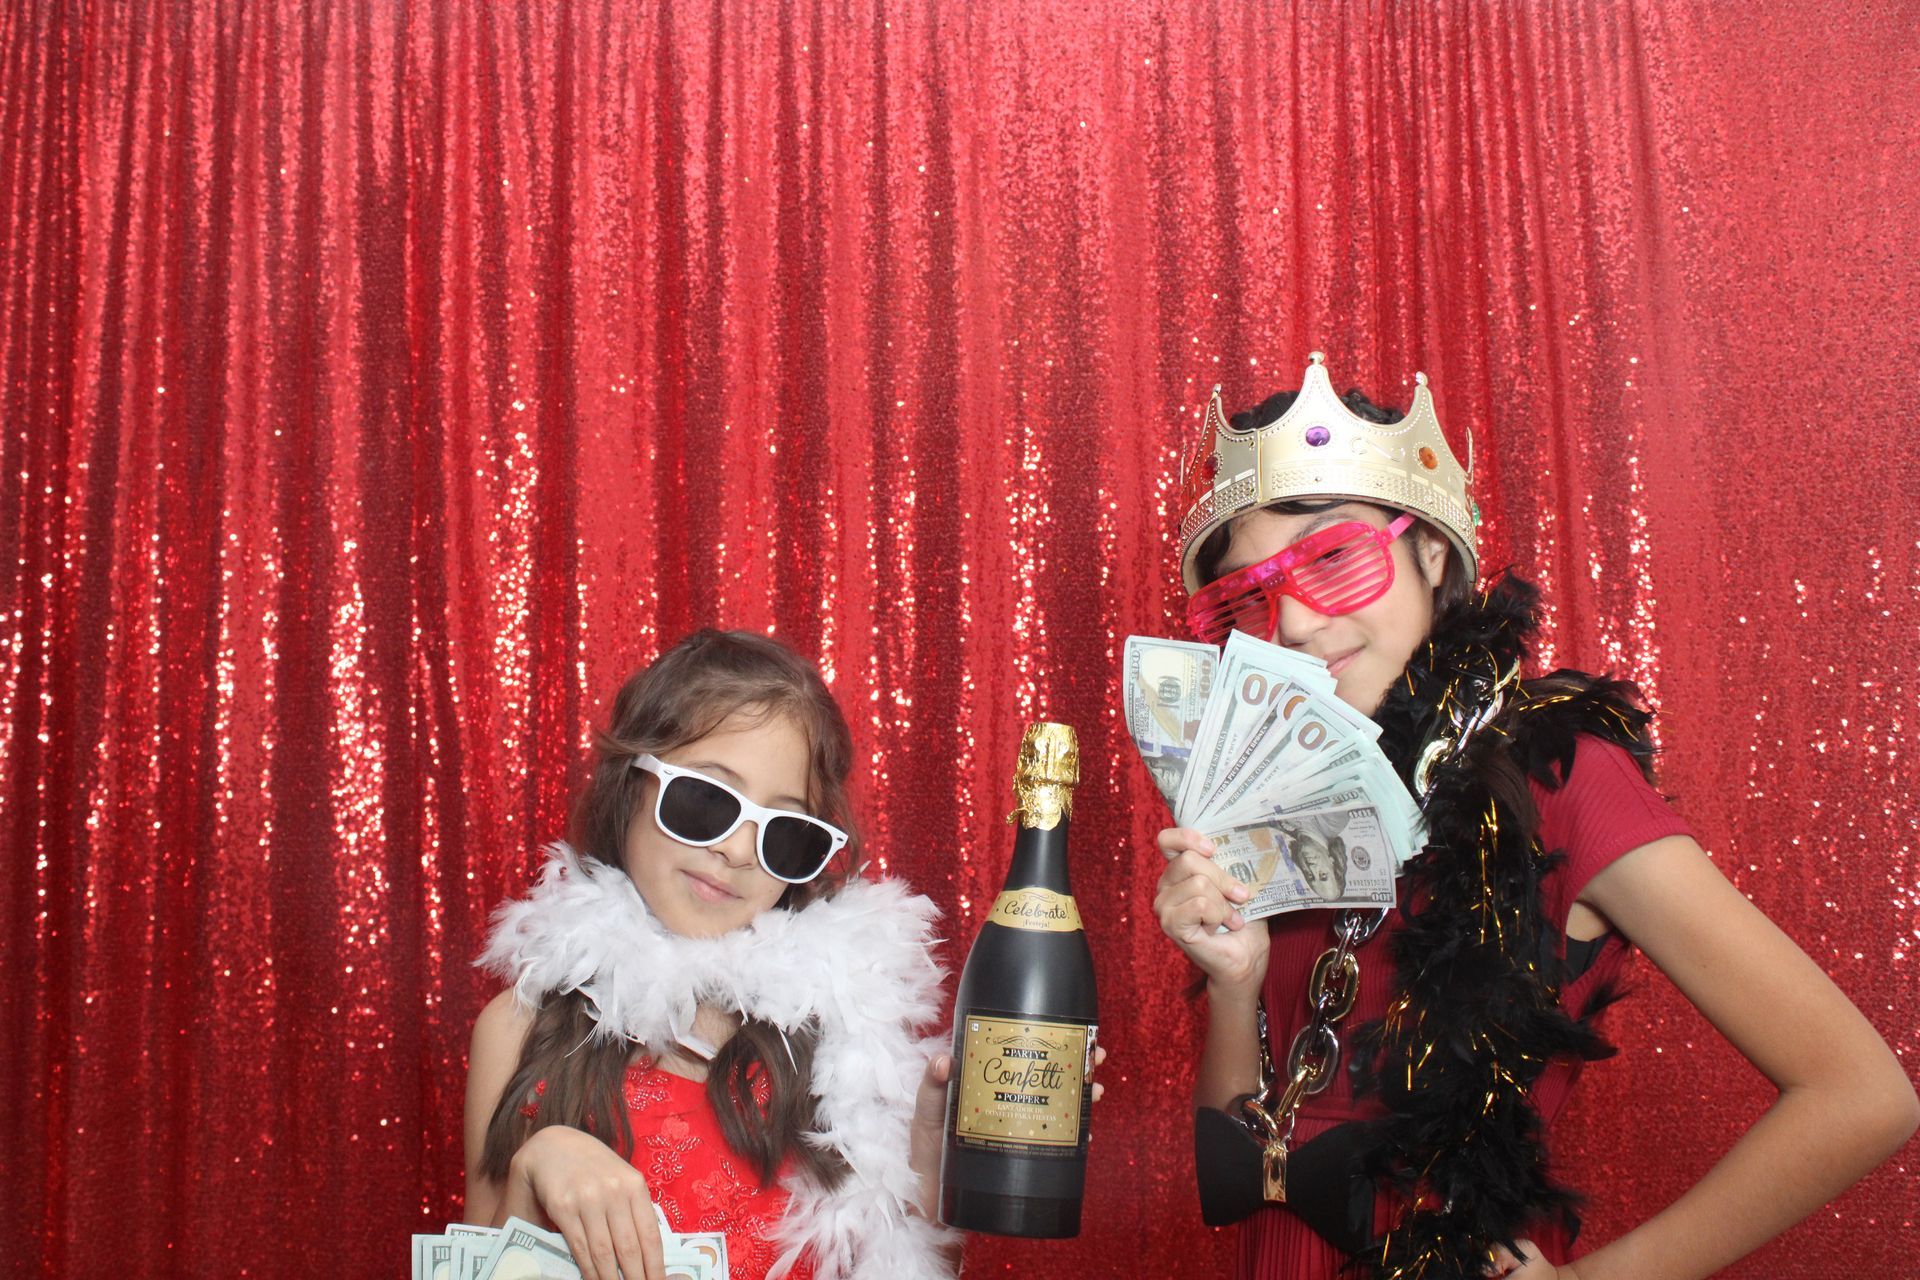 Two girls dressed in red, holding cash and a champagne bottle, posing inside the Cloee Photo Booth.